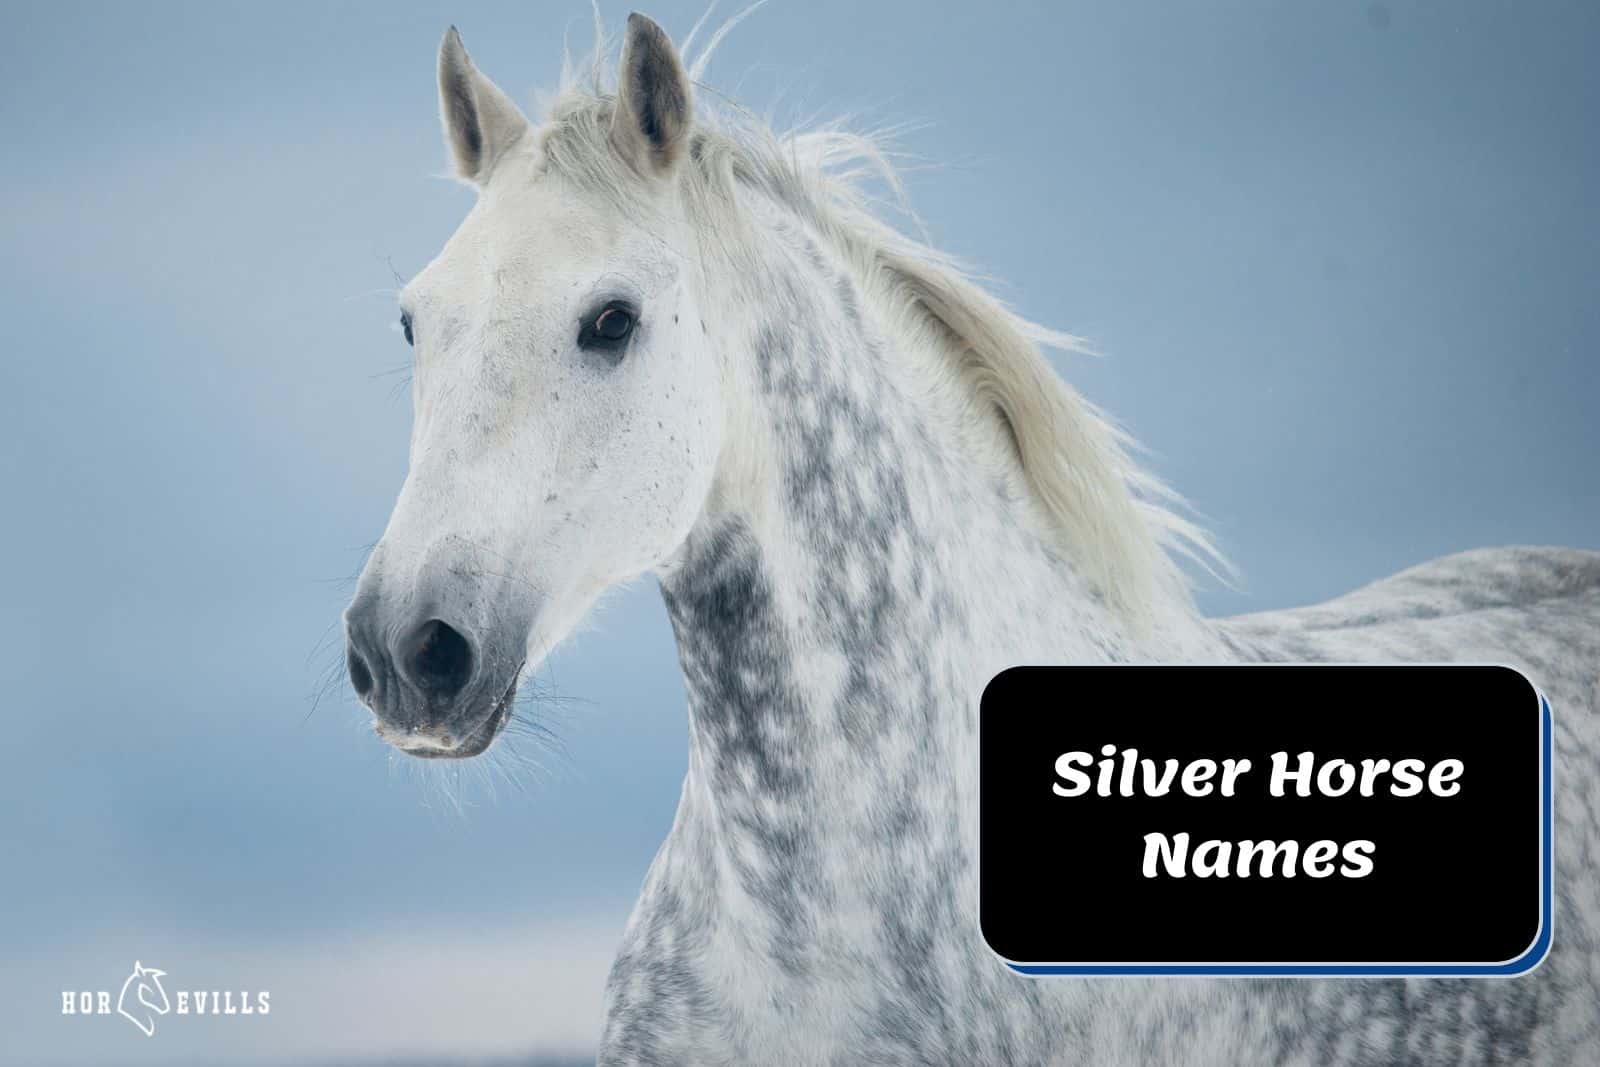 a silver horse looking at the camera [Silver Horse Names]